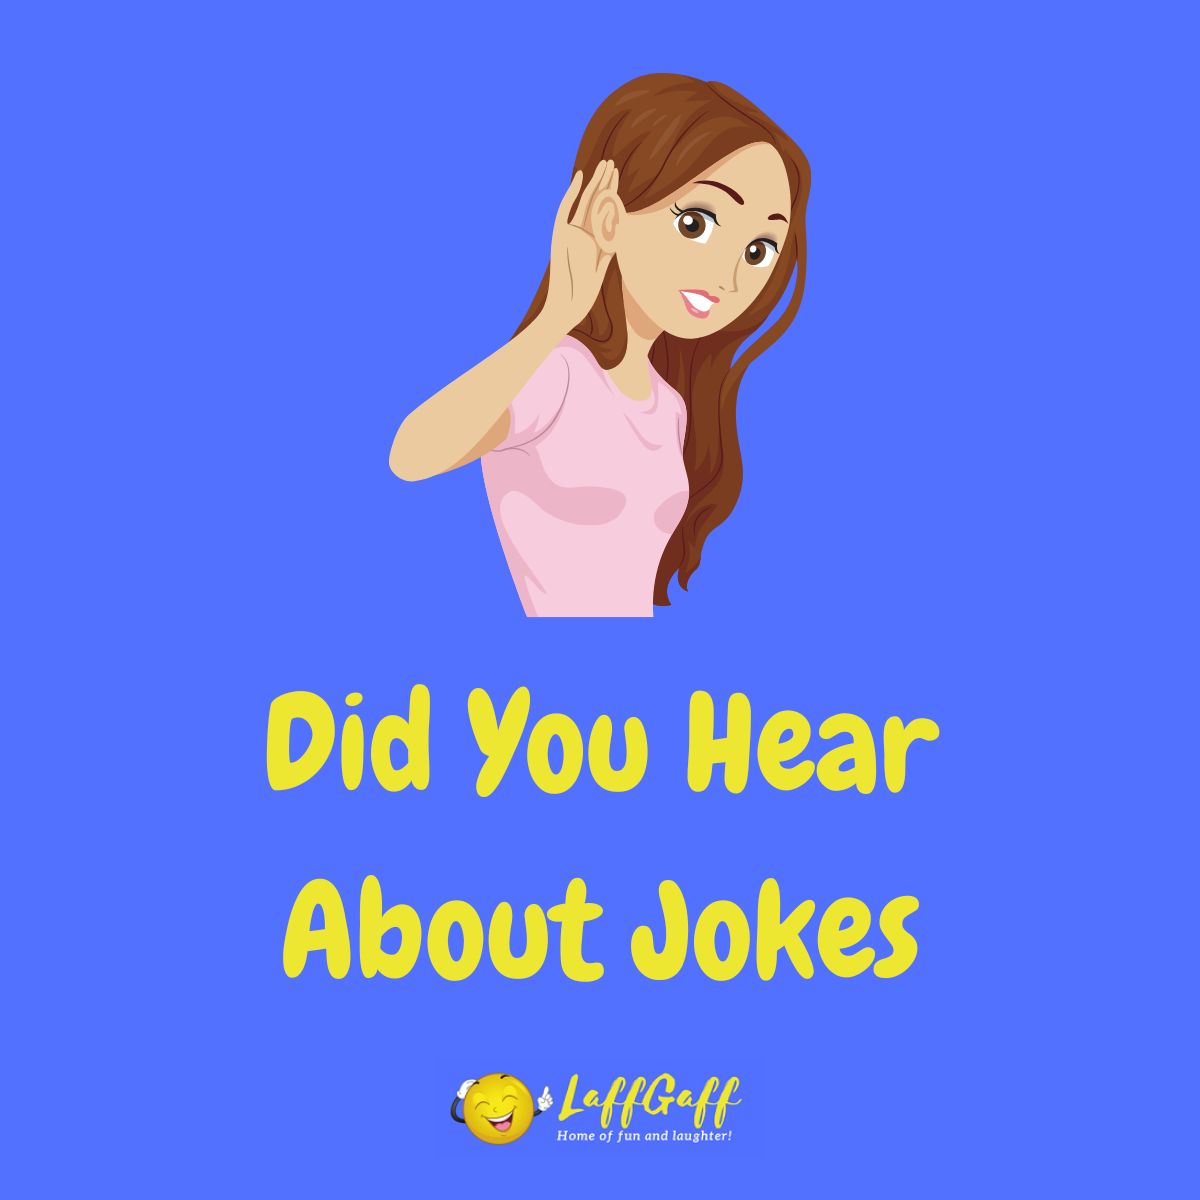 Featured image for a page of funny Did You Hear About jokes.